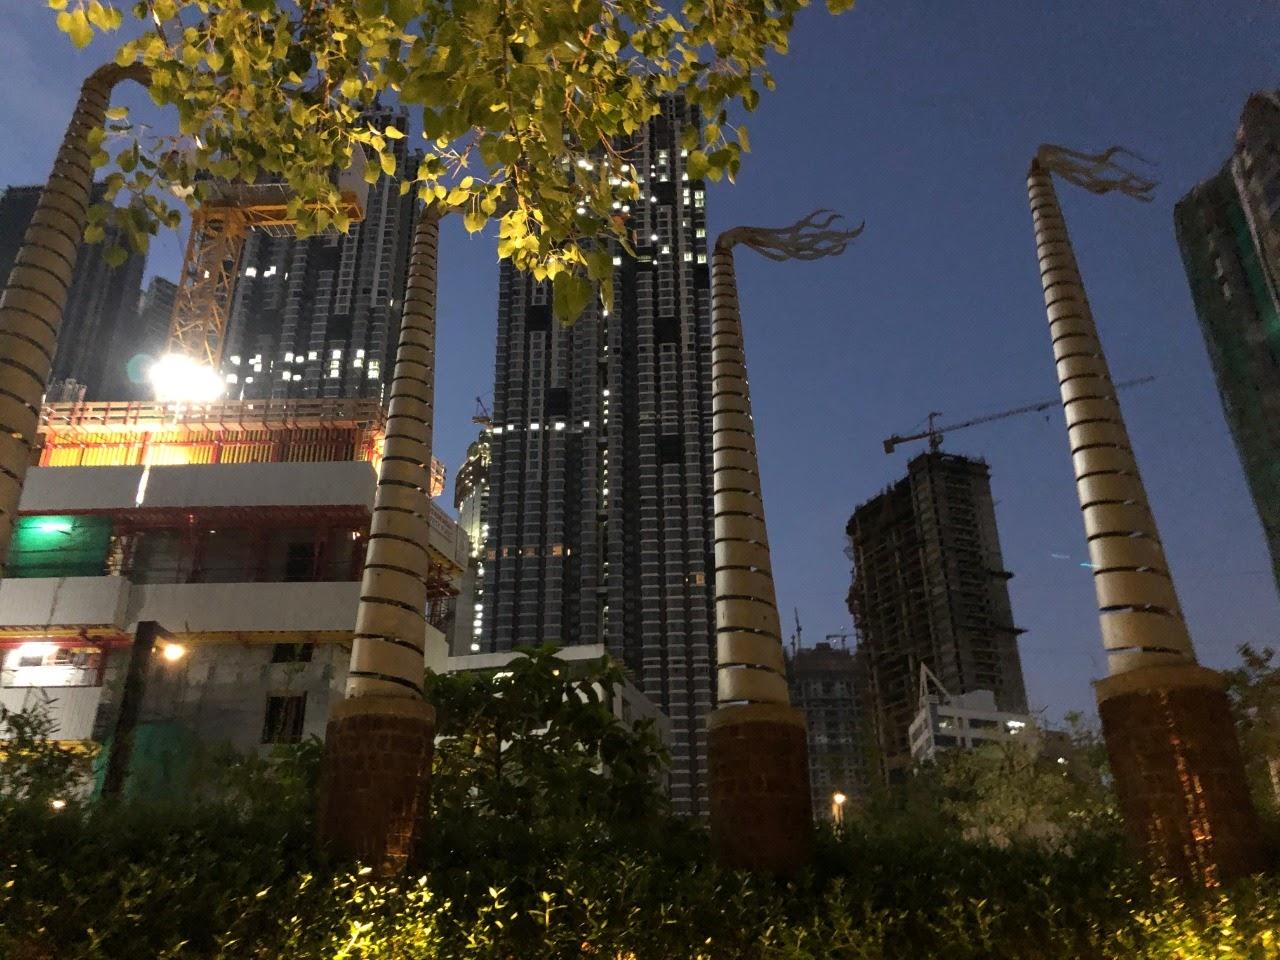 Redevelopment of Shrinivas Mill compound in Parel, now housing three skyscrapers and a memorial park. Sonal Sundararjan, 2019.